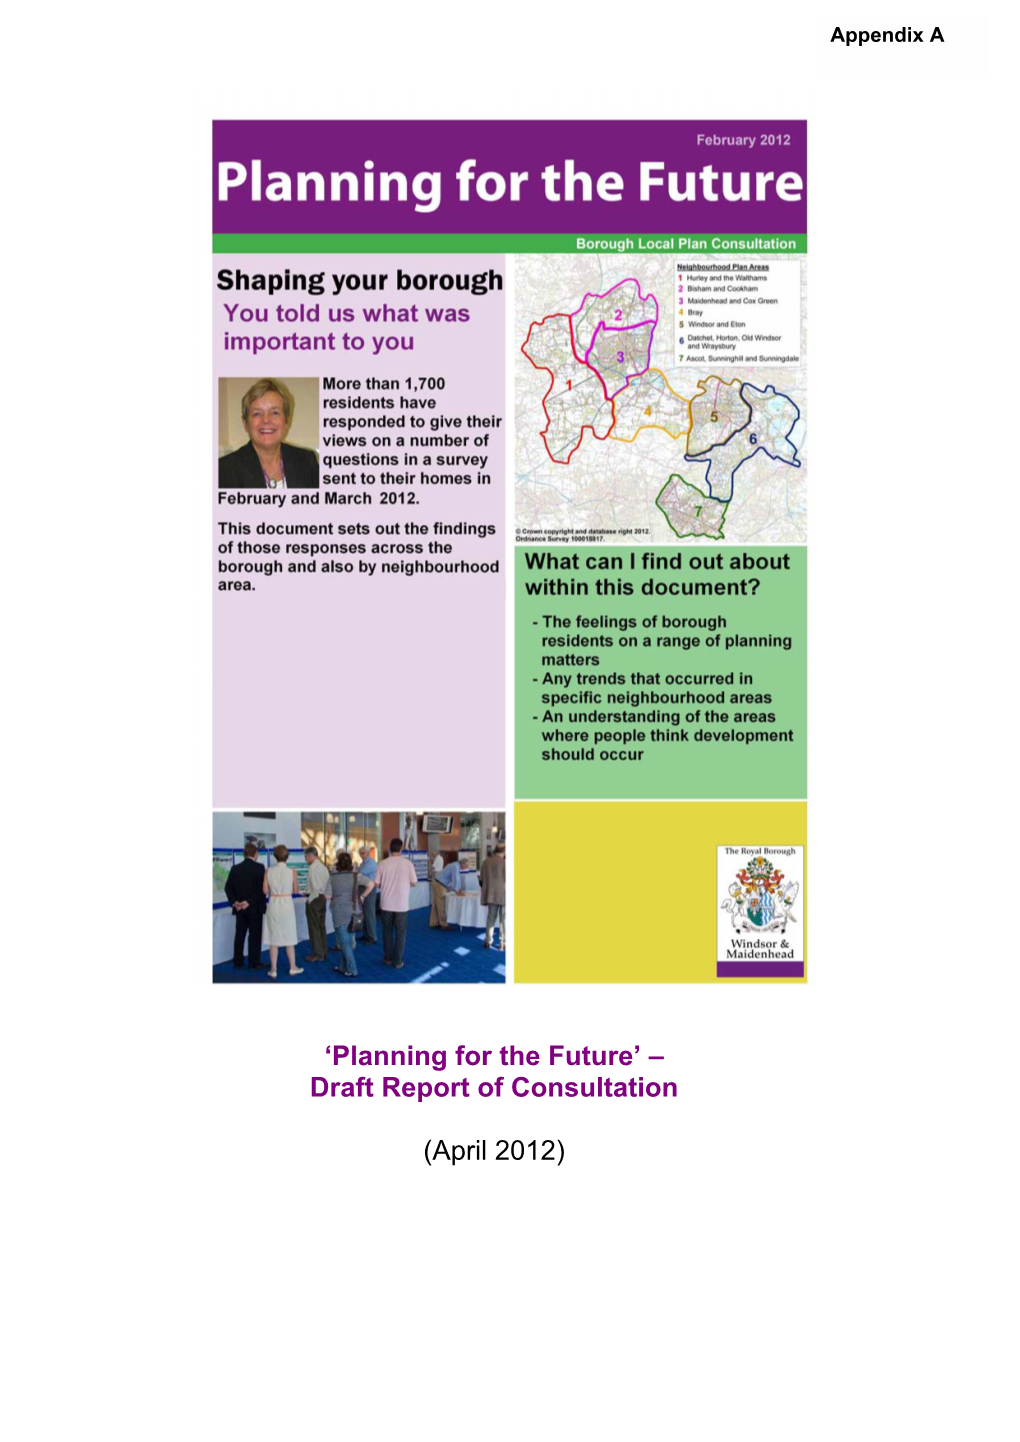 'Planning for the Future' – Draft Report of Consultation (April 2012)